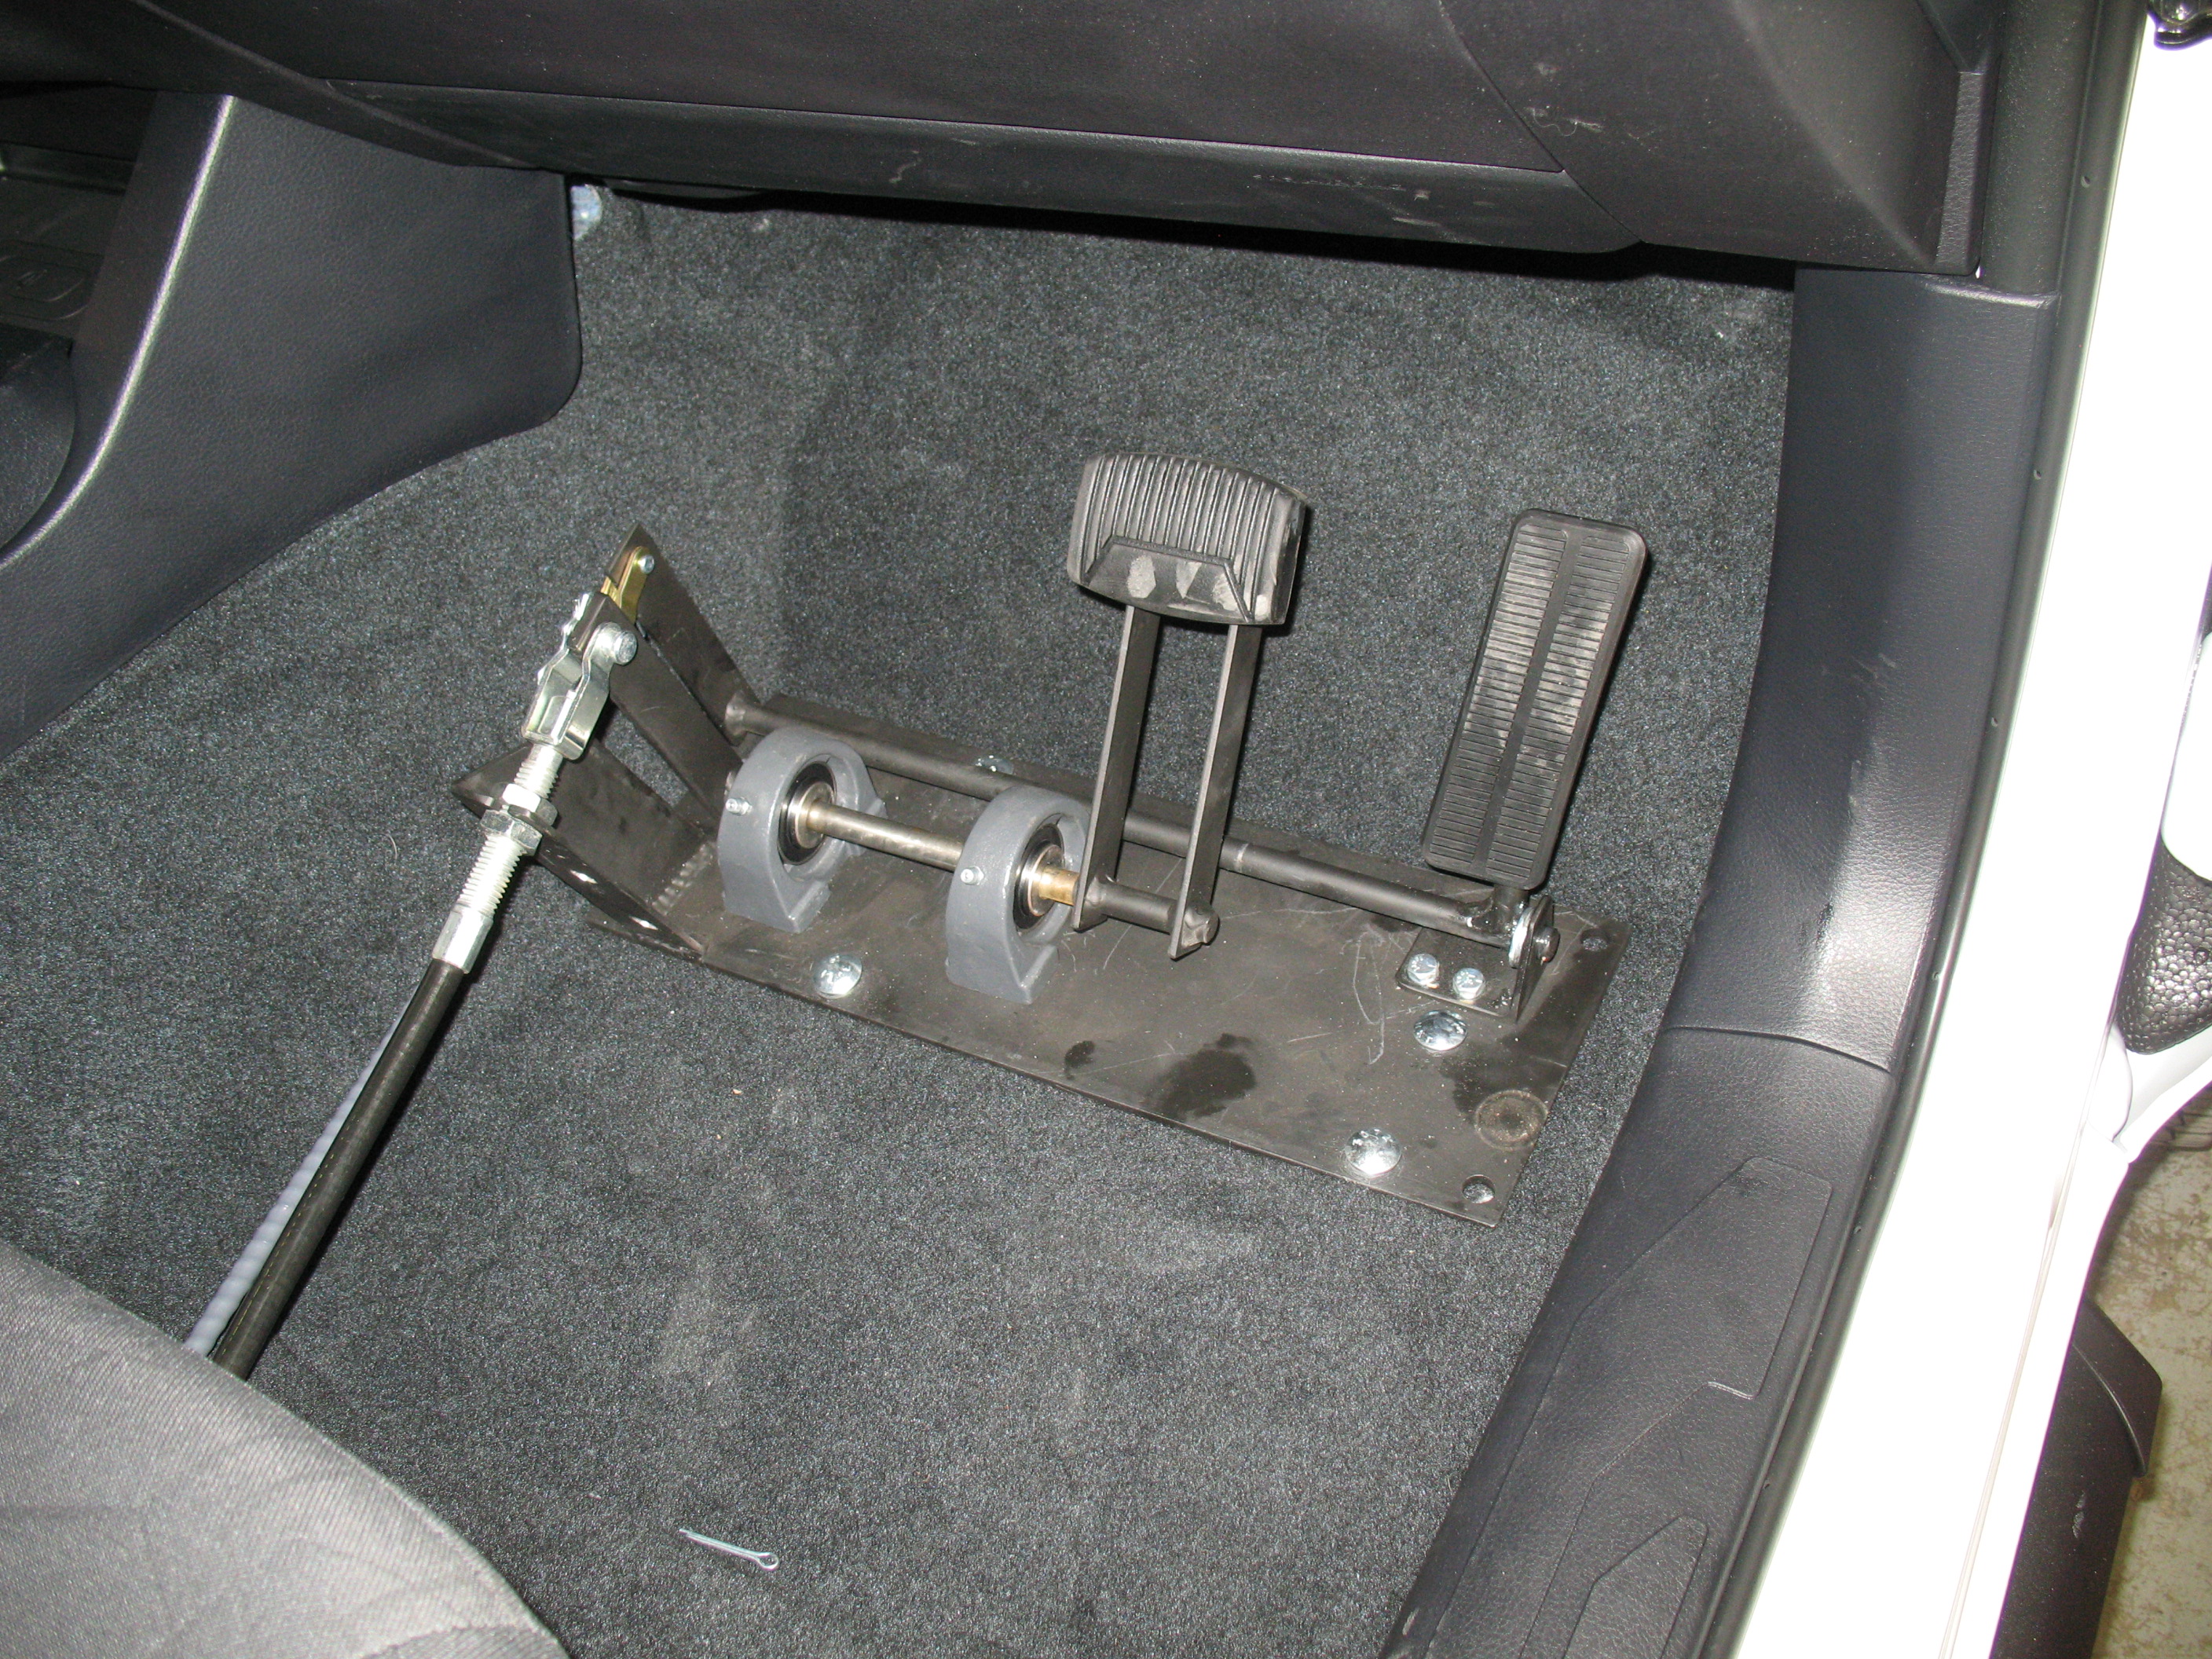 Right Hand Drive Pedal Kits for Postal Vehicle Conversion